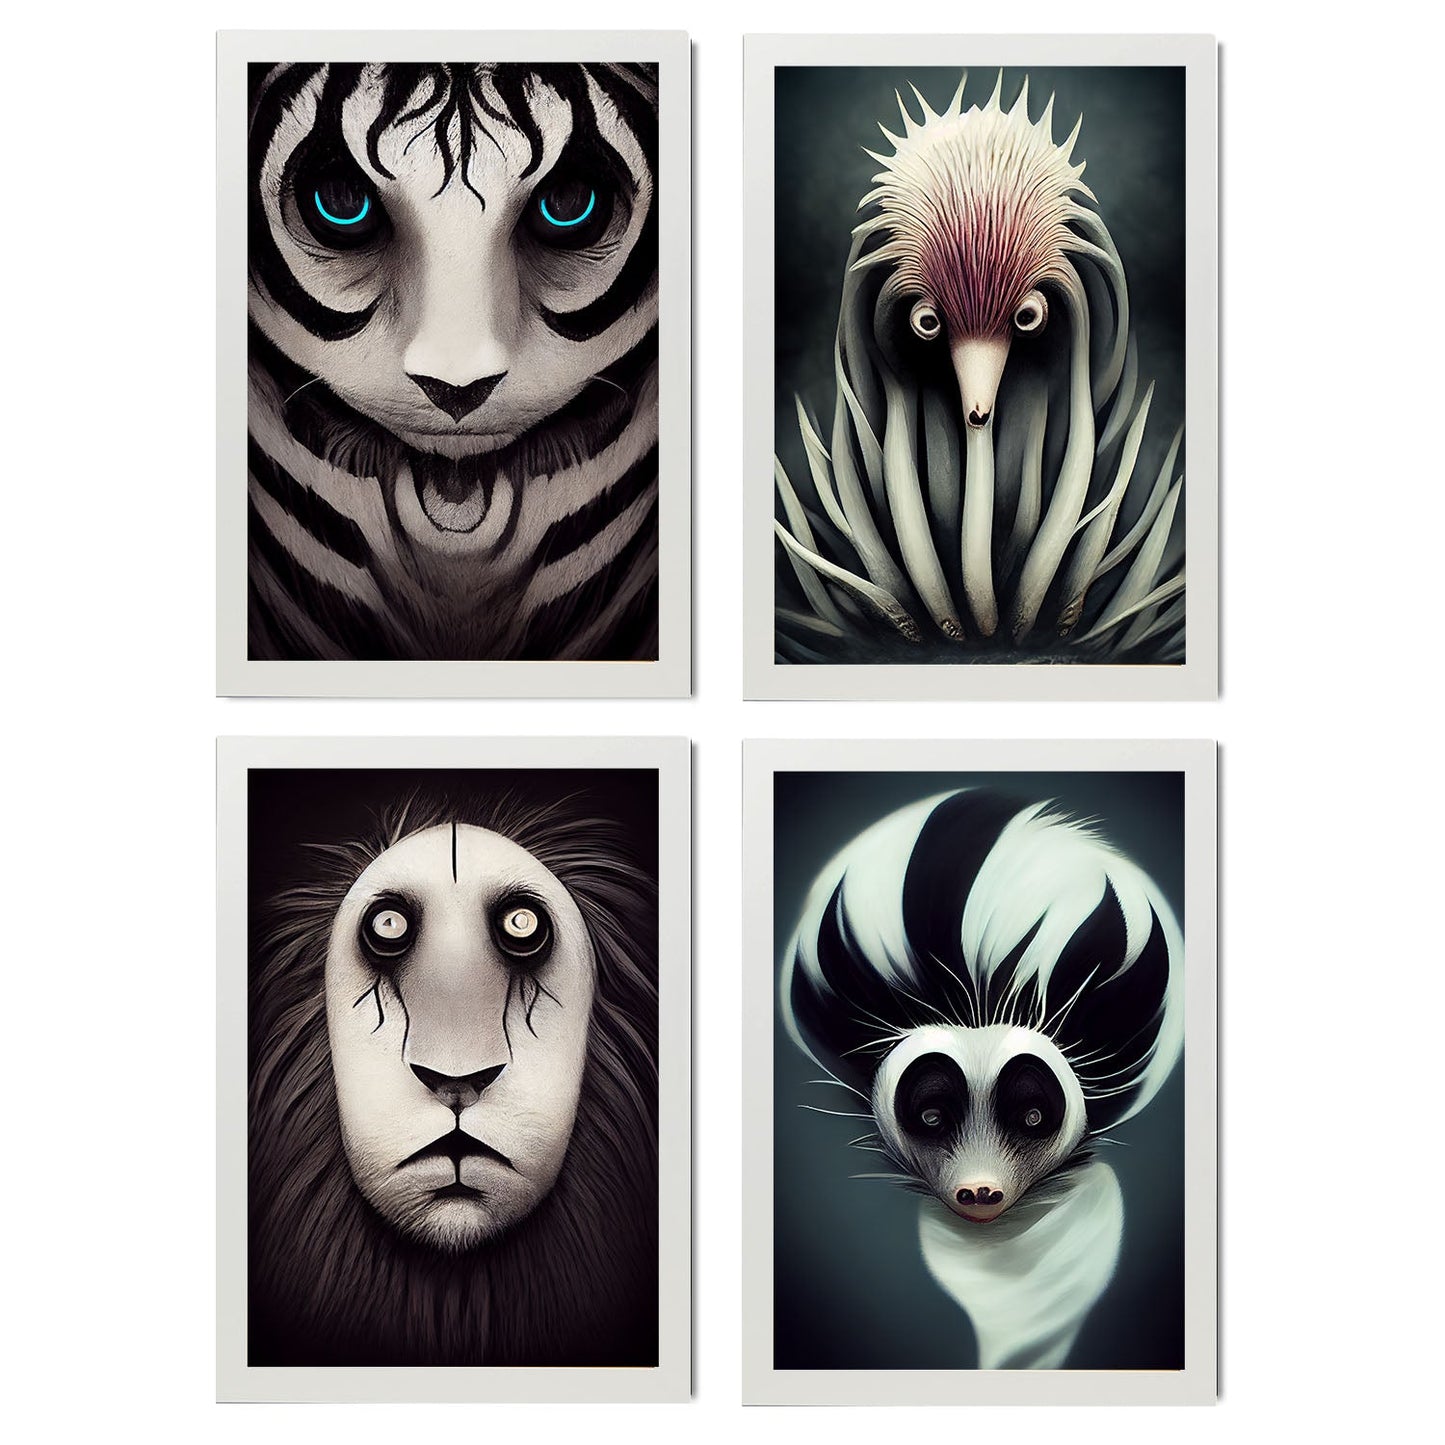 Burton style Animal Illustrations and Posters inspired by Burton's Dark and Goth art Interior Design and Decoration Set Collection 9-Artwork-Nacnic-A4-Marco Blanco-Nacnic Estudio SL